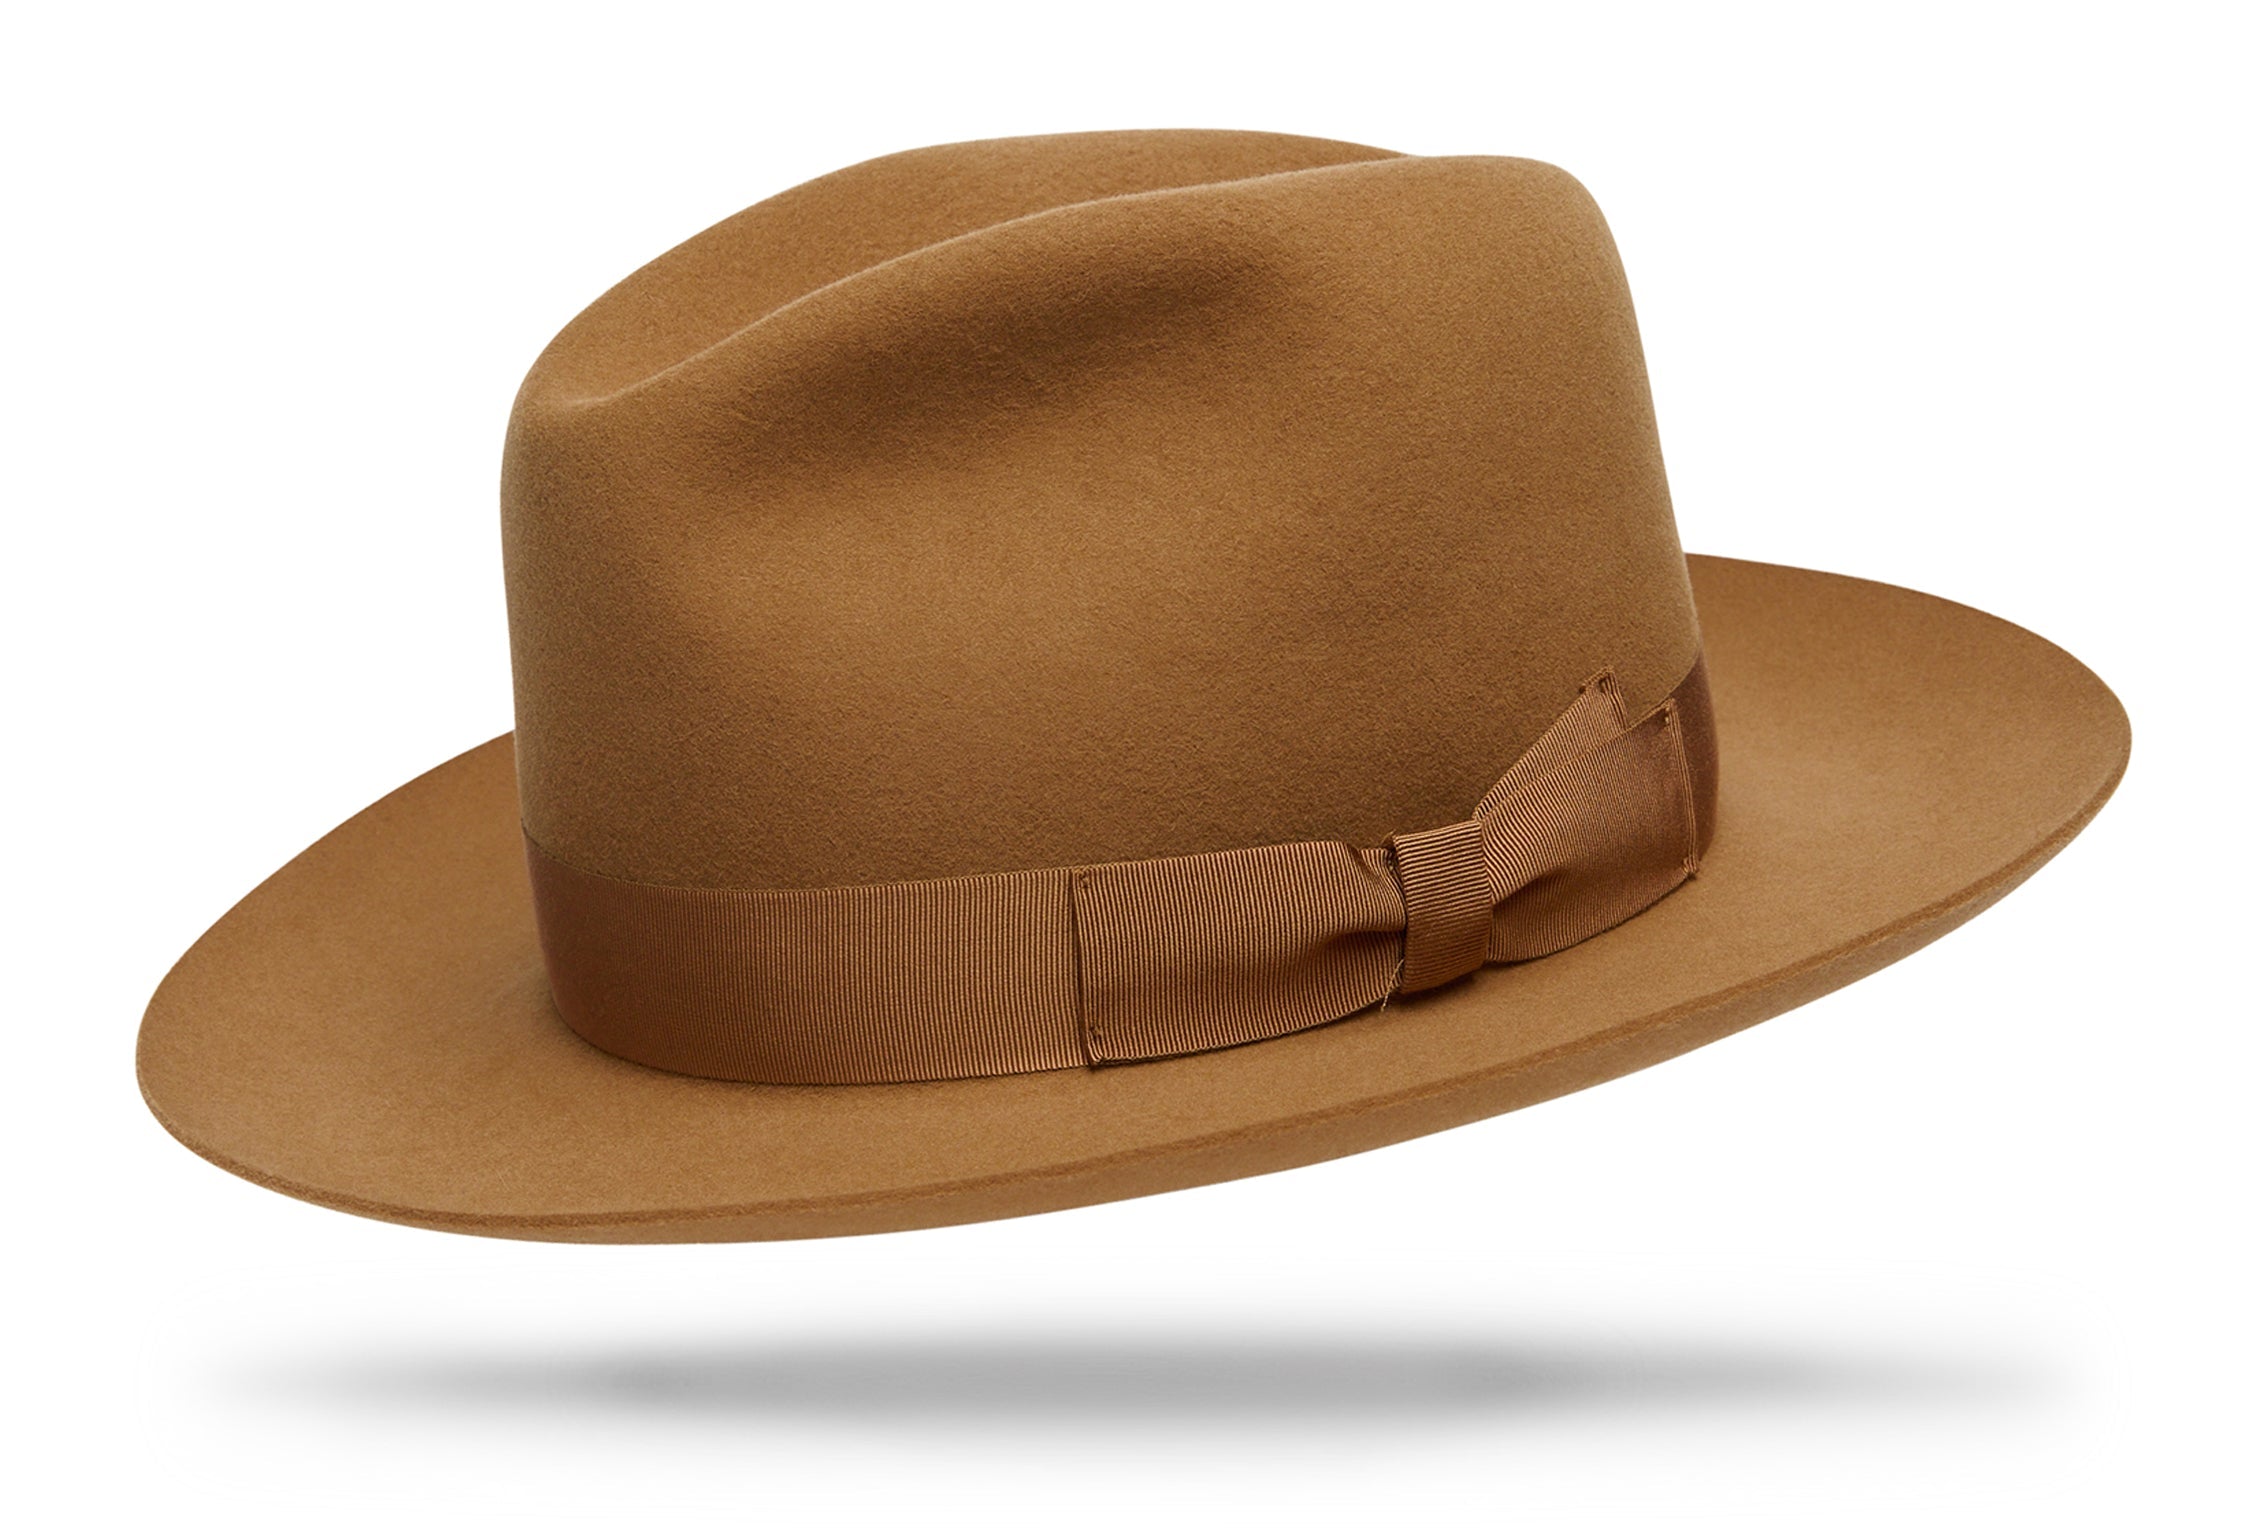 
Design
Our new spin on our timeless classic, the Sienna carries a 4 C-crown and holds a 3' snap brim. Should be a staple in your wardrobe.
Material
Fur felt, sustainably acquired.
Specifications
A 115-gram fur felt beauty. The Sienna holds a 3 snap brim with a classic 4 C-crown. A refined camel, harmonized with a tone-on-tone double bow hatband.Handcrafted in our NYC atelier.